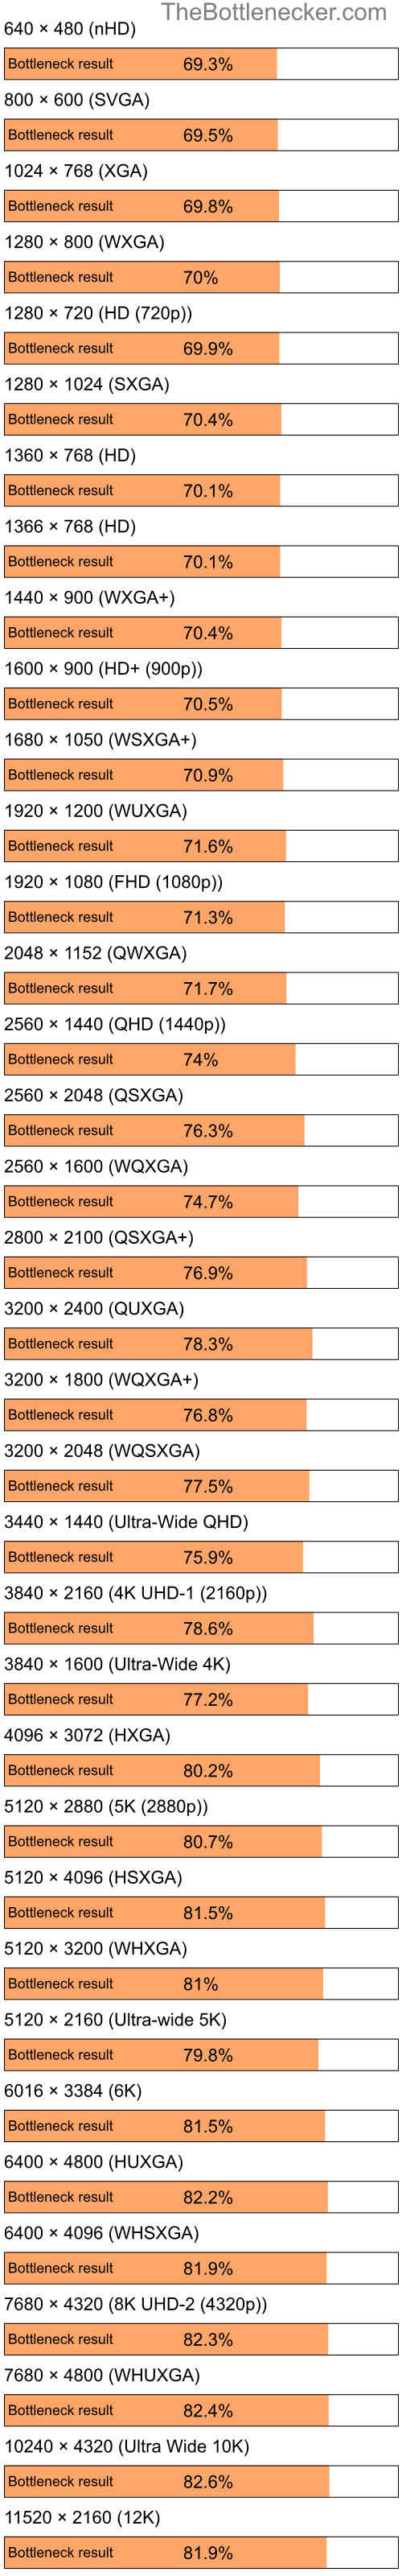 Bottleneck results by resolution for Intel Pentium 4 and AMD Mobility Radeon 4100 in Graphic Card Intense Tasks